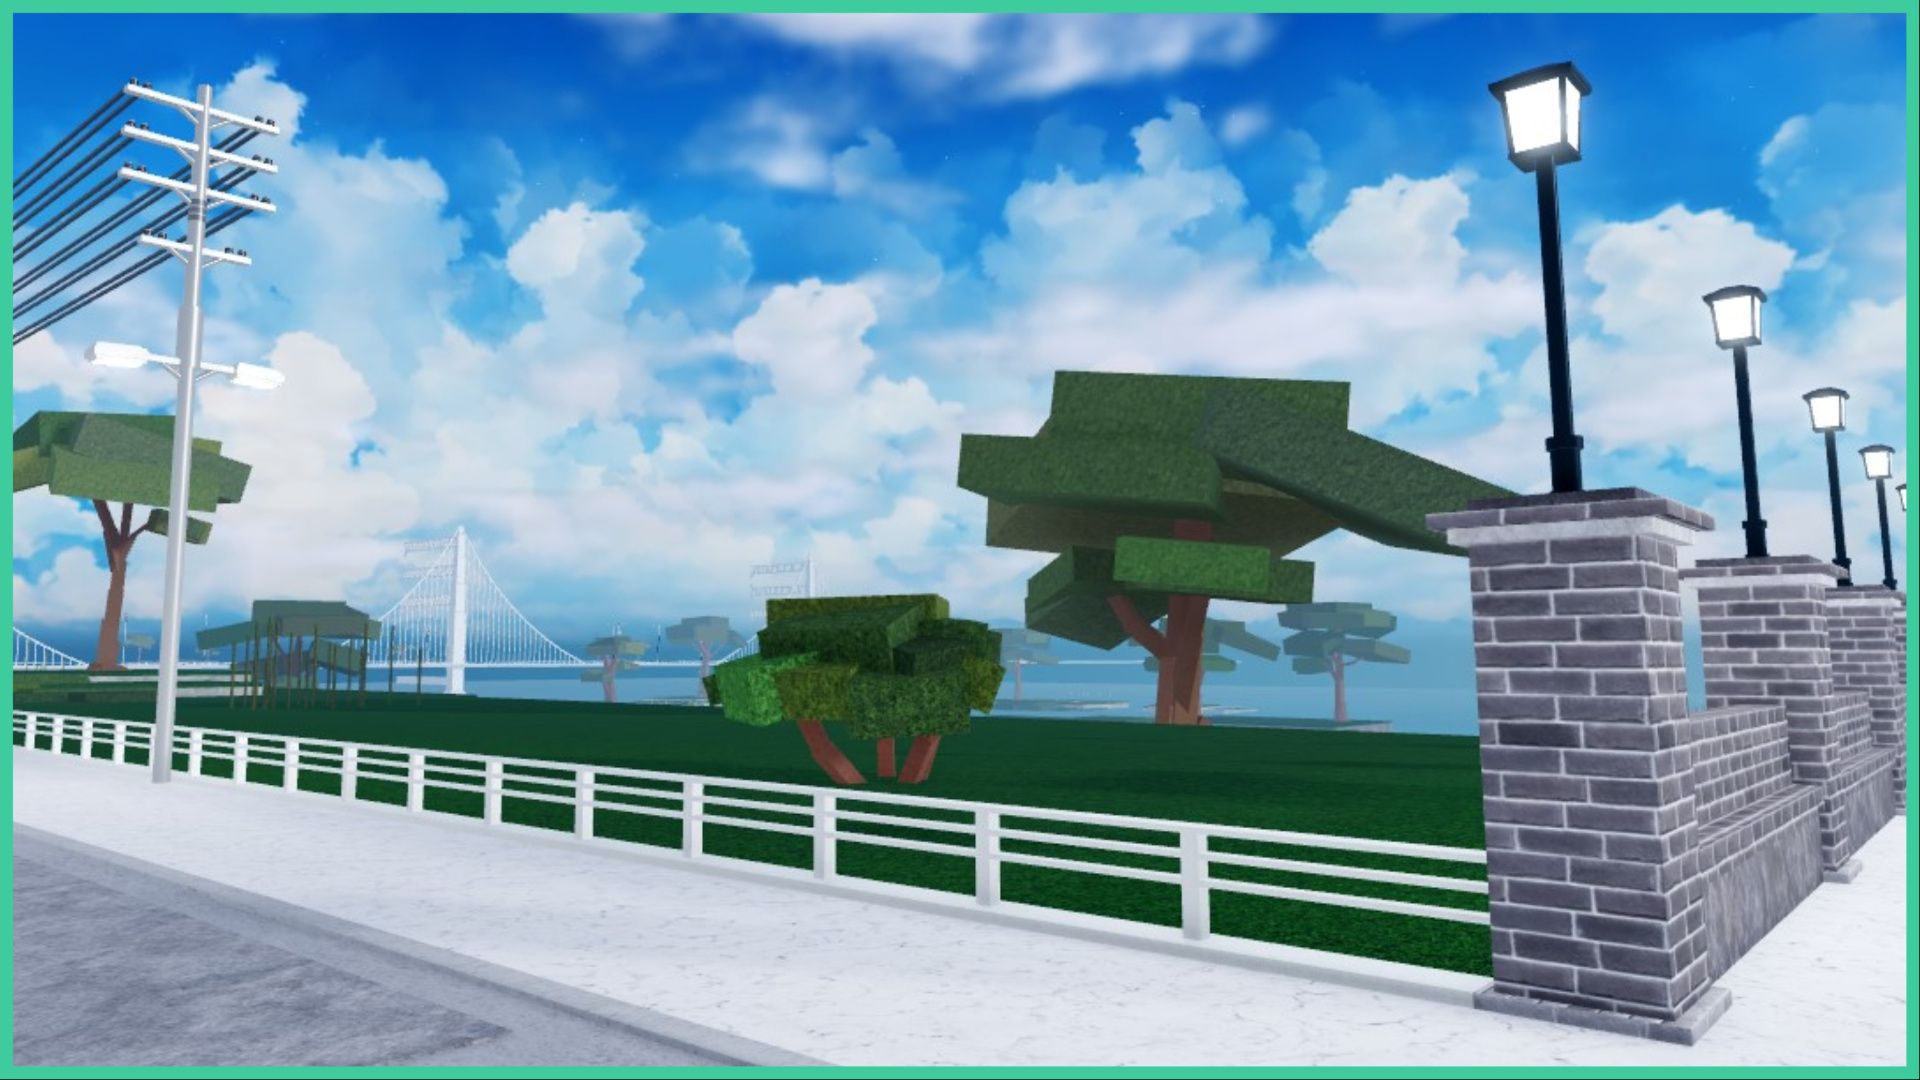 feature image for our all grades in type soul guide, it's a screenshot of karakura town, with the bridge in the distance that stretches over the water, multiple trees dotted around, a metal fence sectioning off a patch of grass, with a utility pole, and a stone fence to the right with lamps on the top of each peak